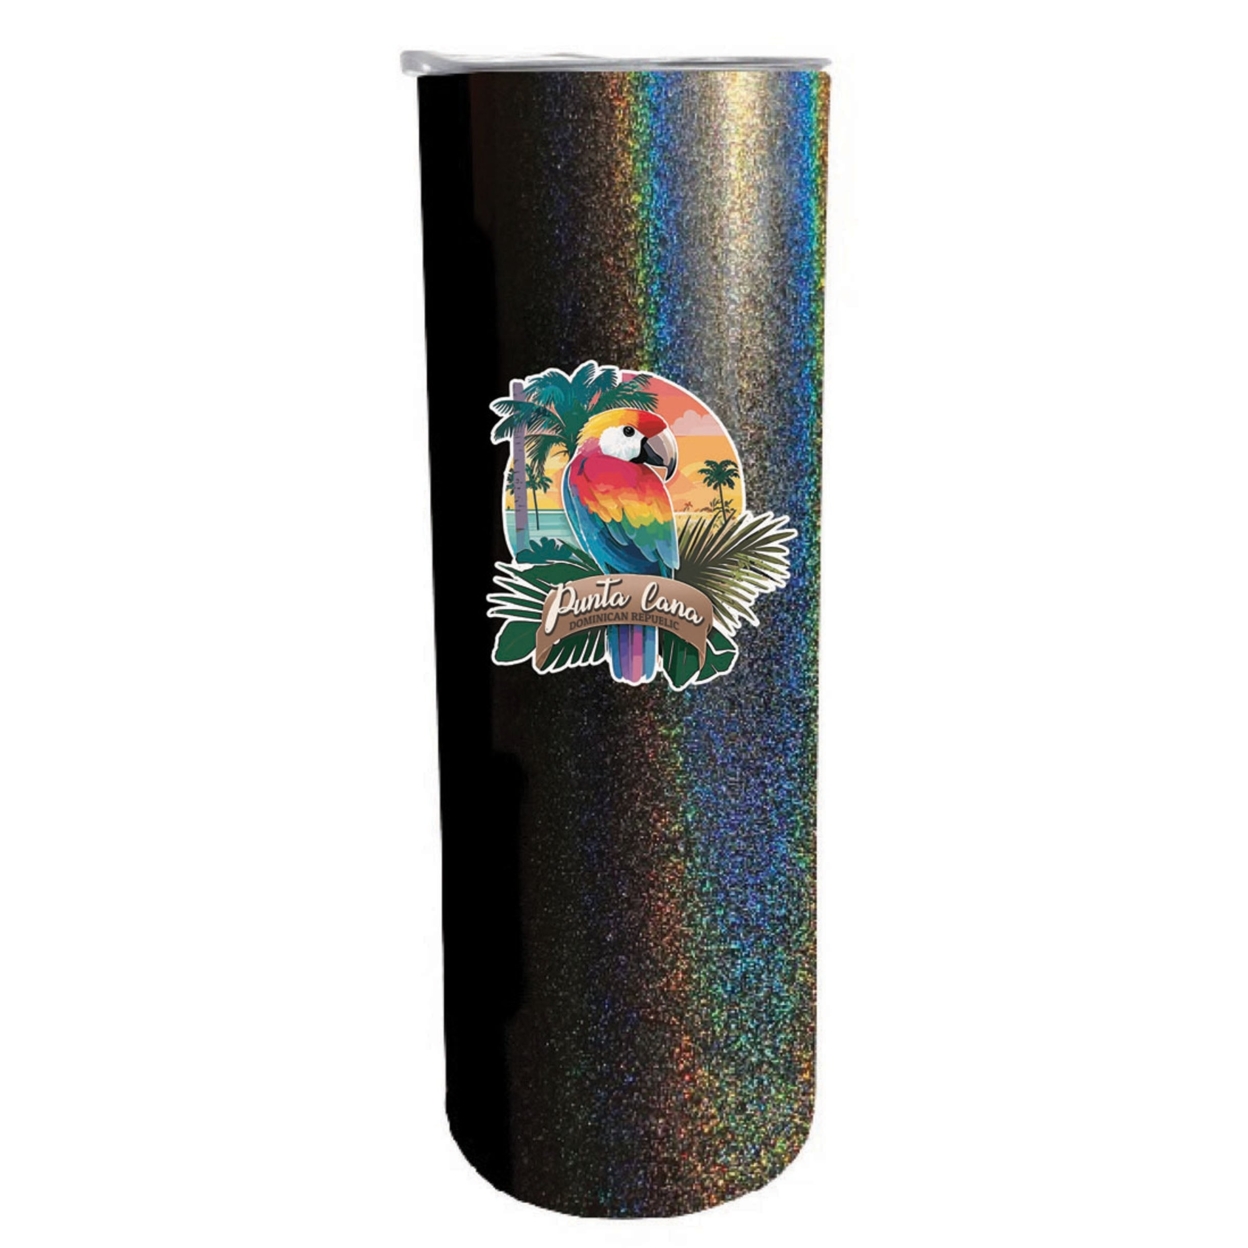 Punta Cana Dominican Republic Souvenir 20 Oz Insulated Stainless Steel Skinny Tumbler - Navy, PARROT B